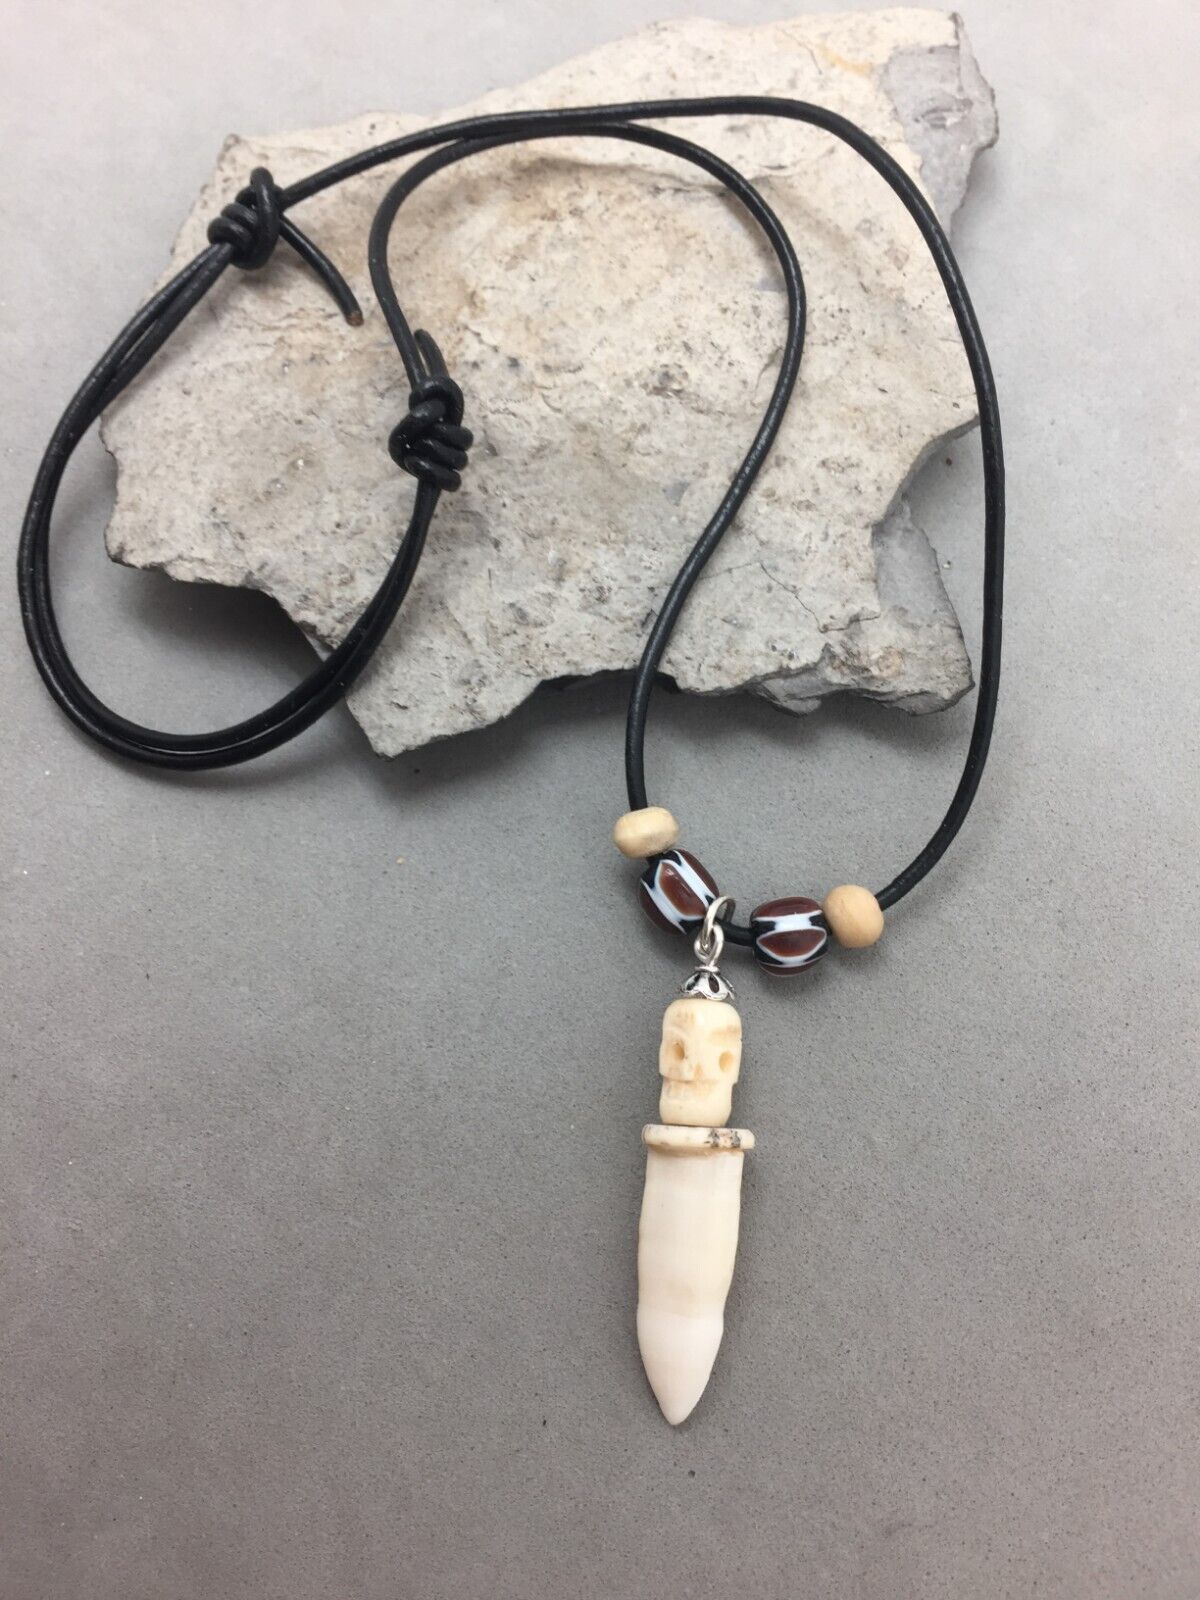 Alligator Tooth Necklace Sterling Silver Skull Head Leather Cord Trade Beads Adj